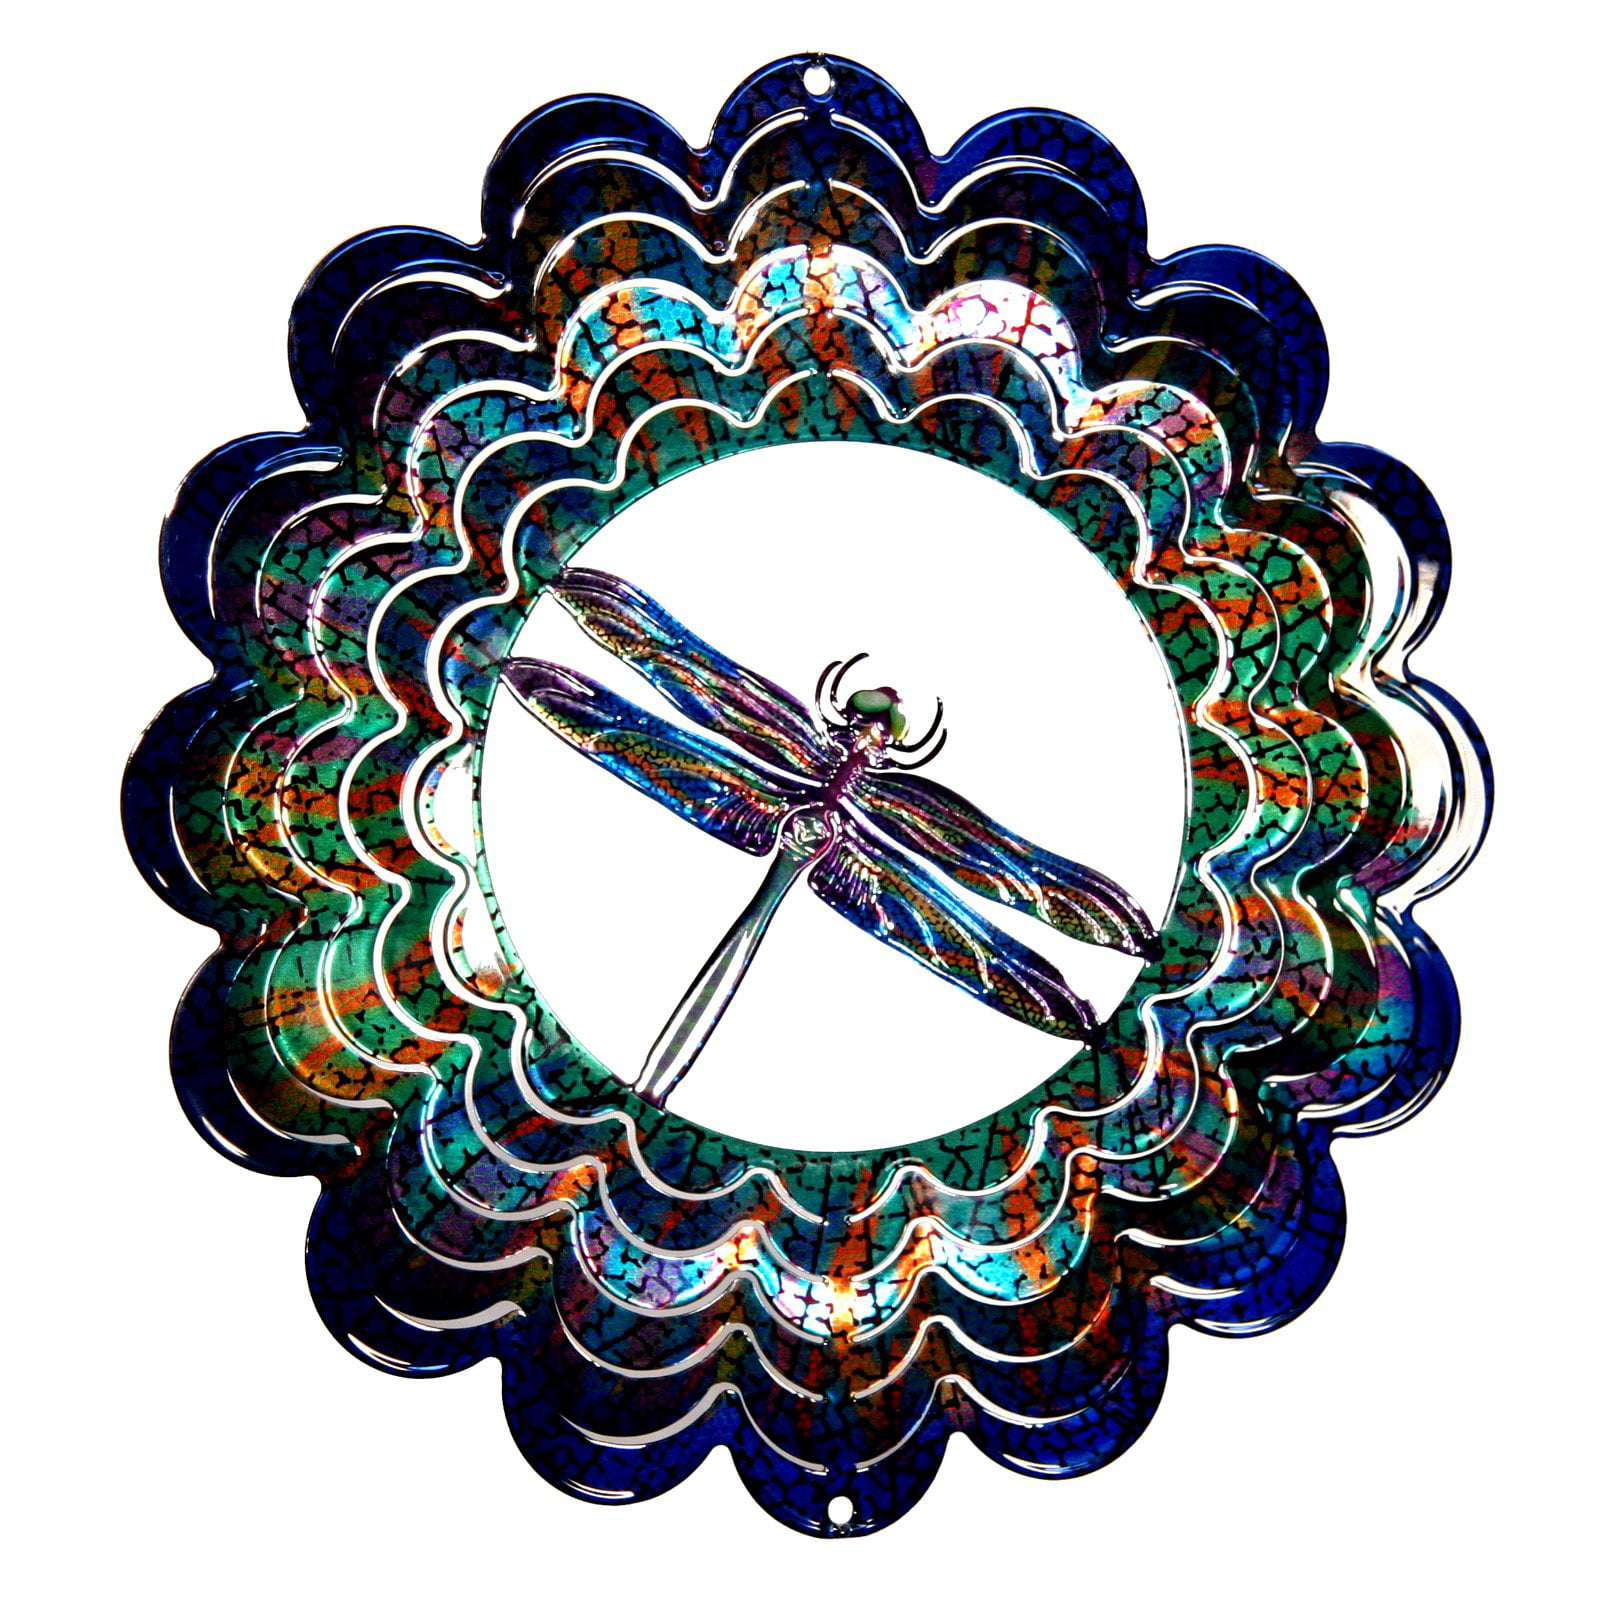 24” PURPLE DRAGONFLY printed spin DUET SPINNER hanging garden décor ITB-4871 